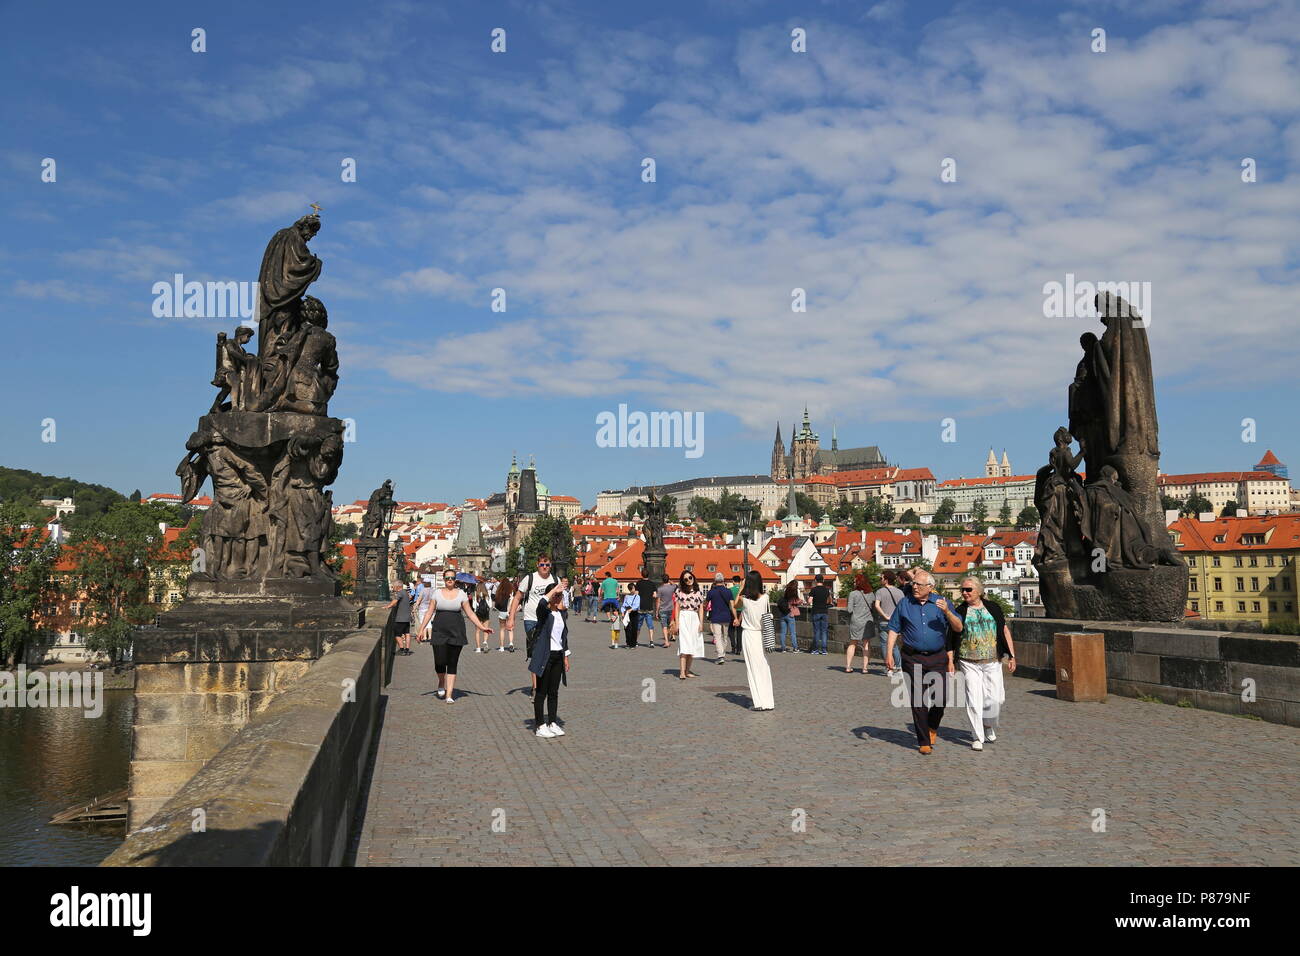 Statues of St Francis Xavier (left) and St Cyril and St Methodius (right), Charles Bridge, Prague, Czechia (Czech Republic), Europe Stock Photo